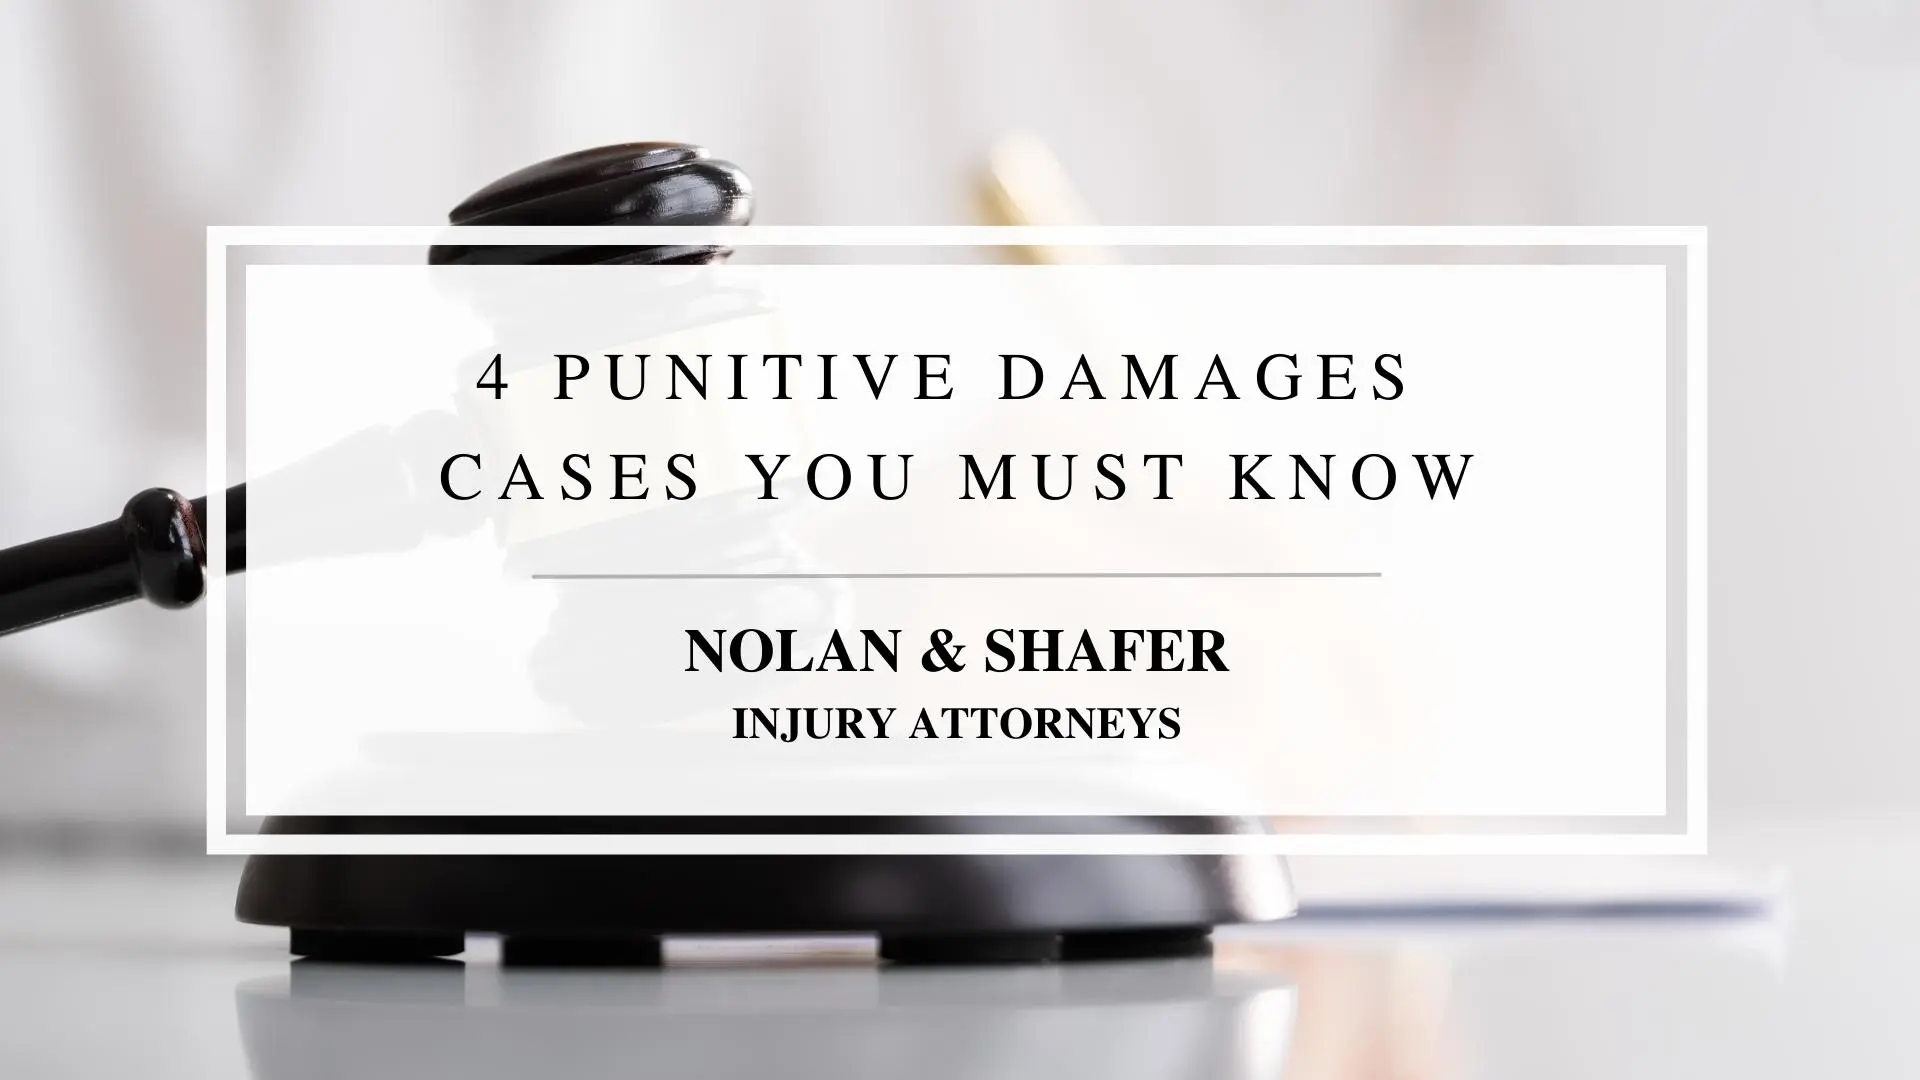 Featured image of 4 punitive damages cases you must know